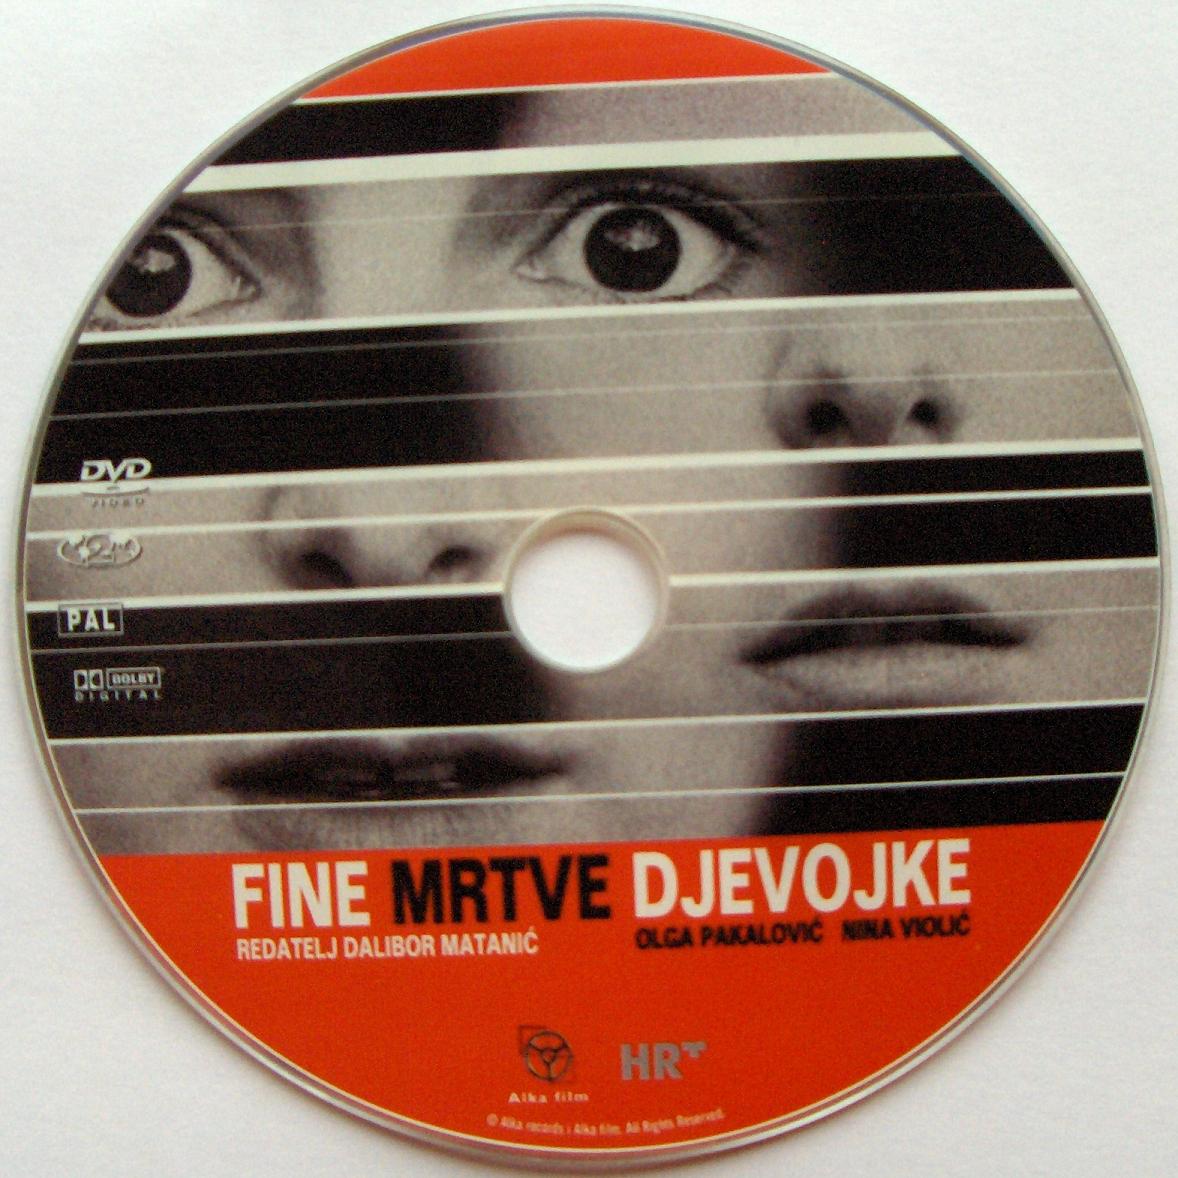 Click to view full size image -  DVD Cover - F - DVD - FINE MRTVE DJEVOJKE - CD - DVD - FINE MRTVE DJEVOJKE - CD.jpg